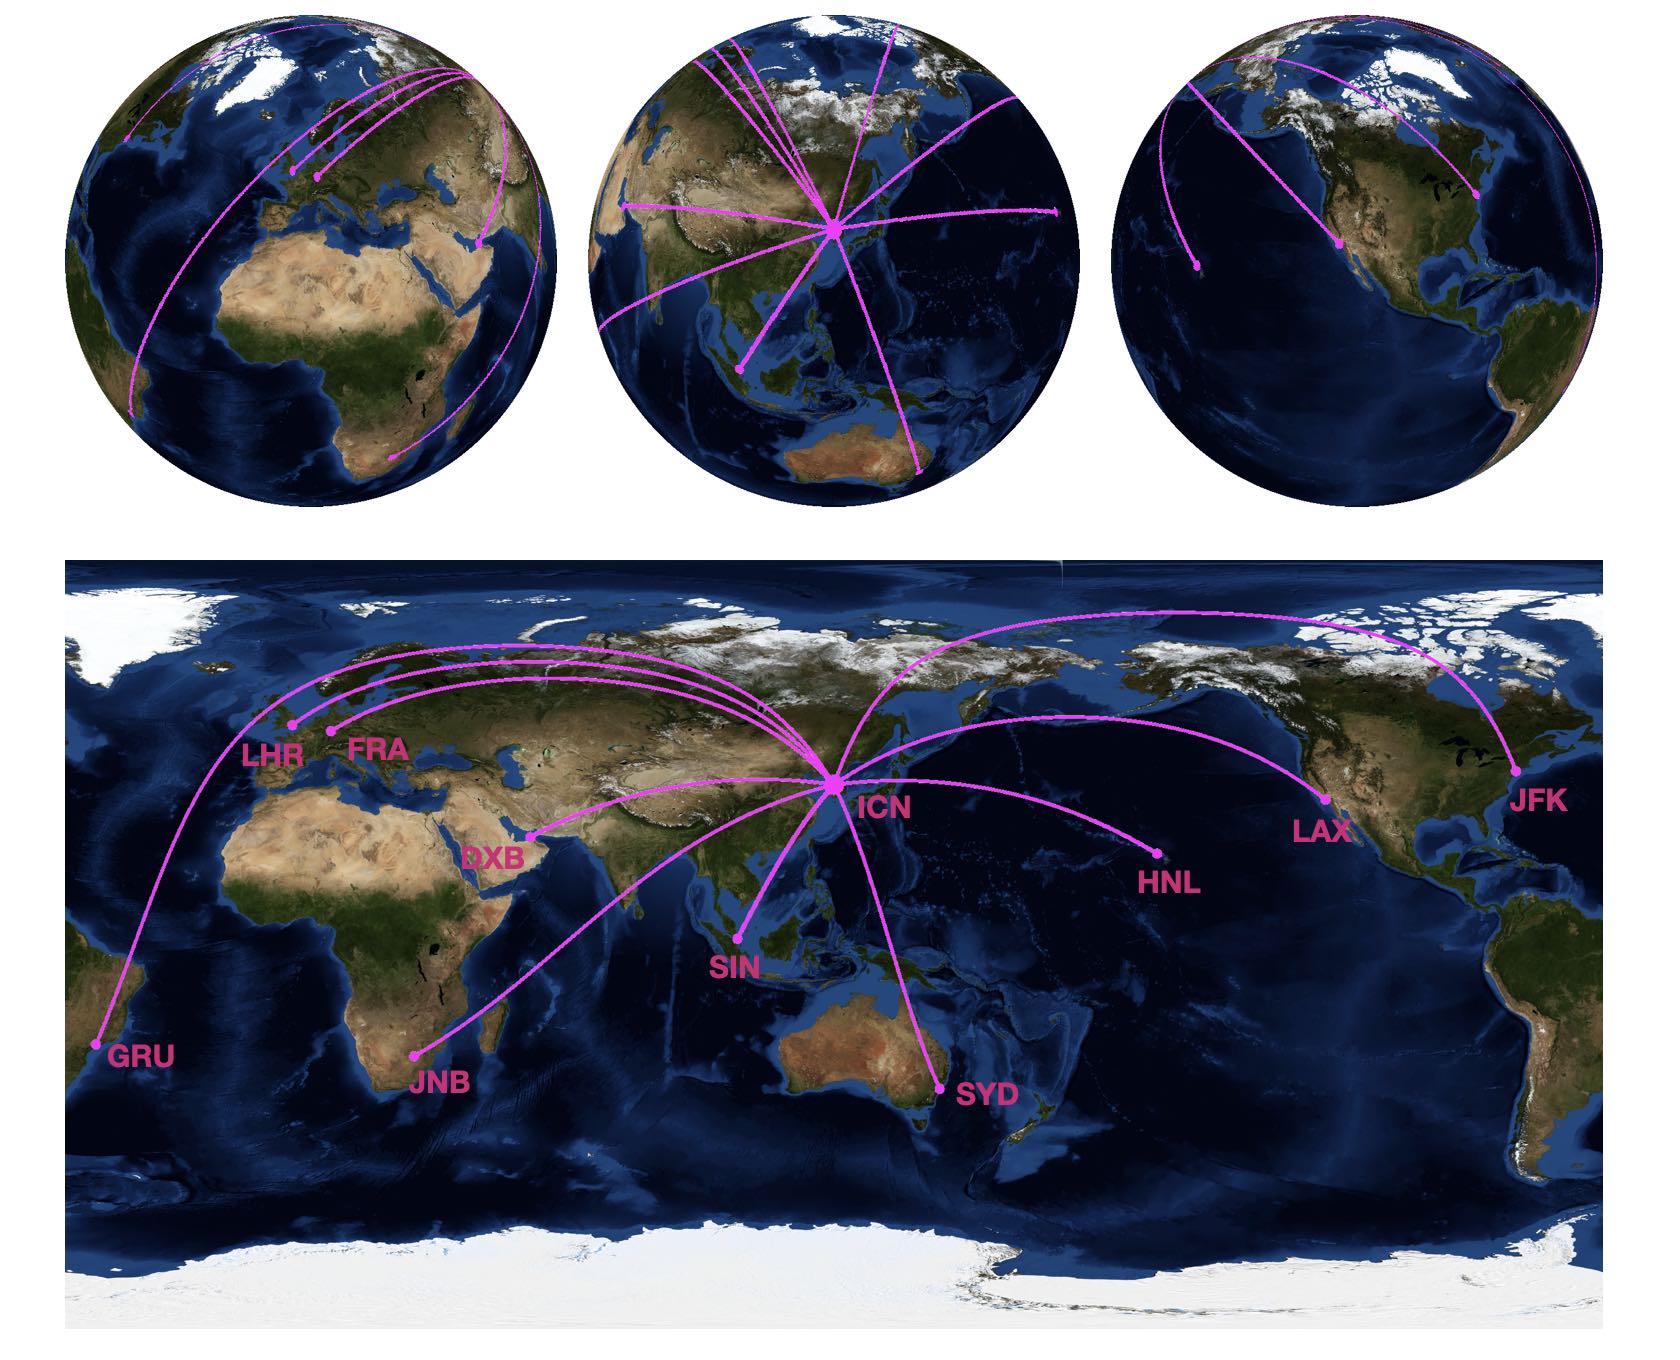 approximate filght path from Seoul Incheon airport to various destinations. Those are given by the geodesic equation on spherical surface